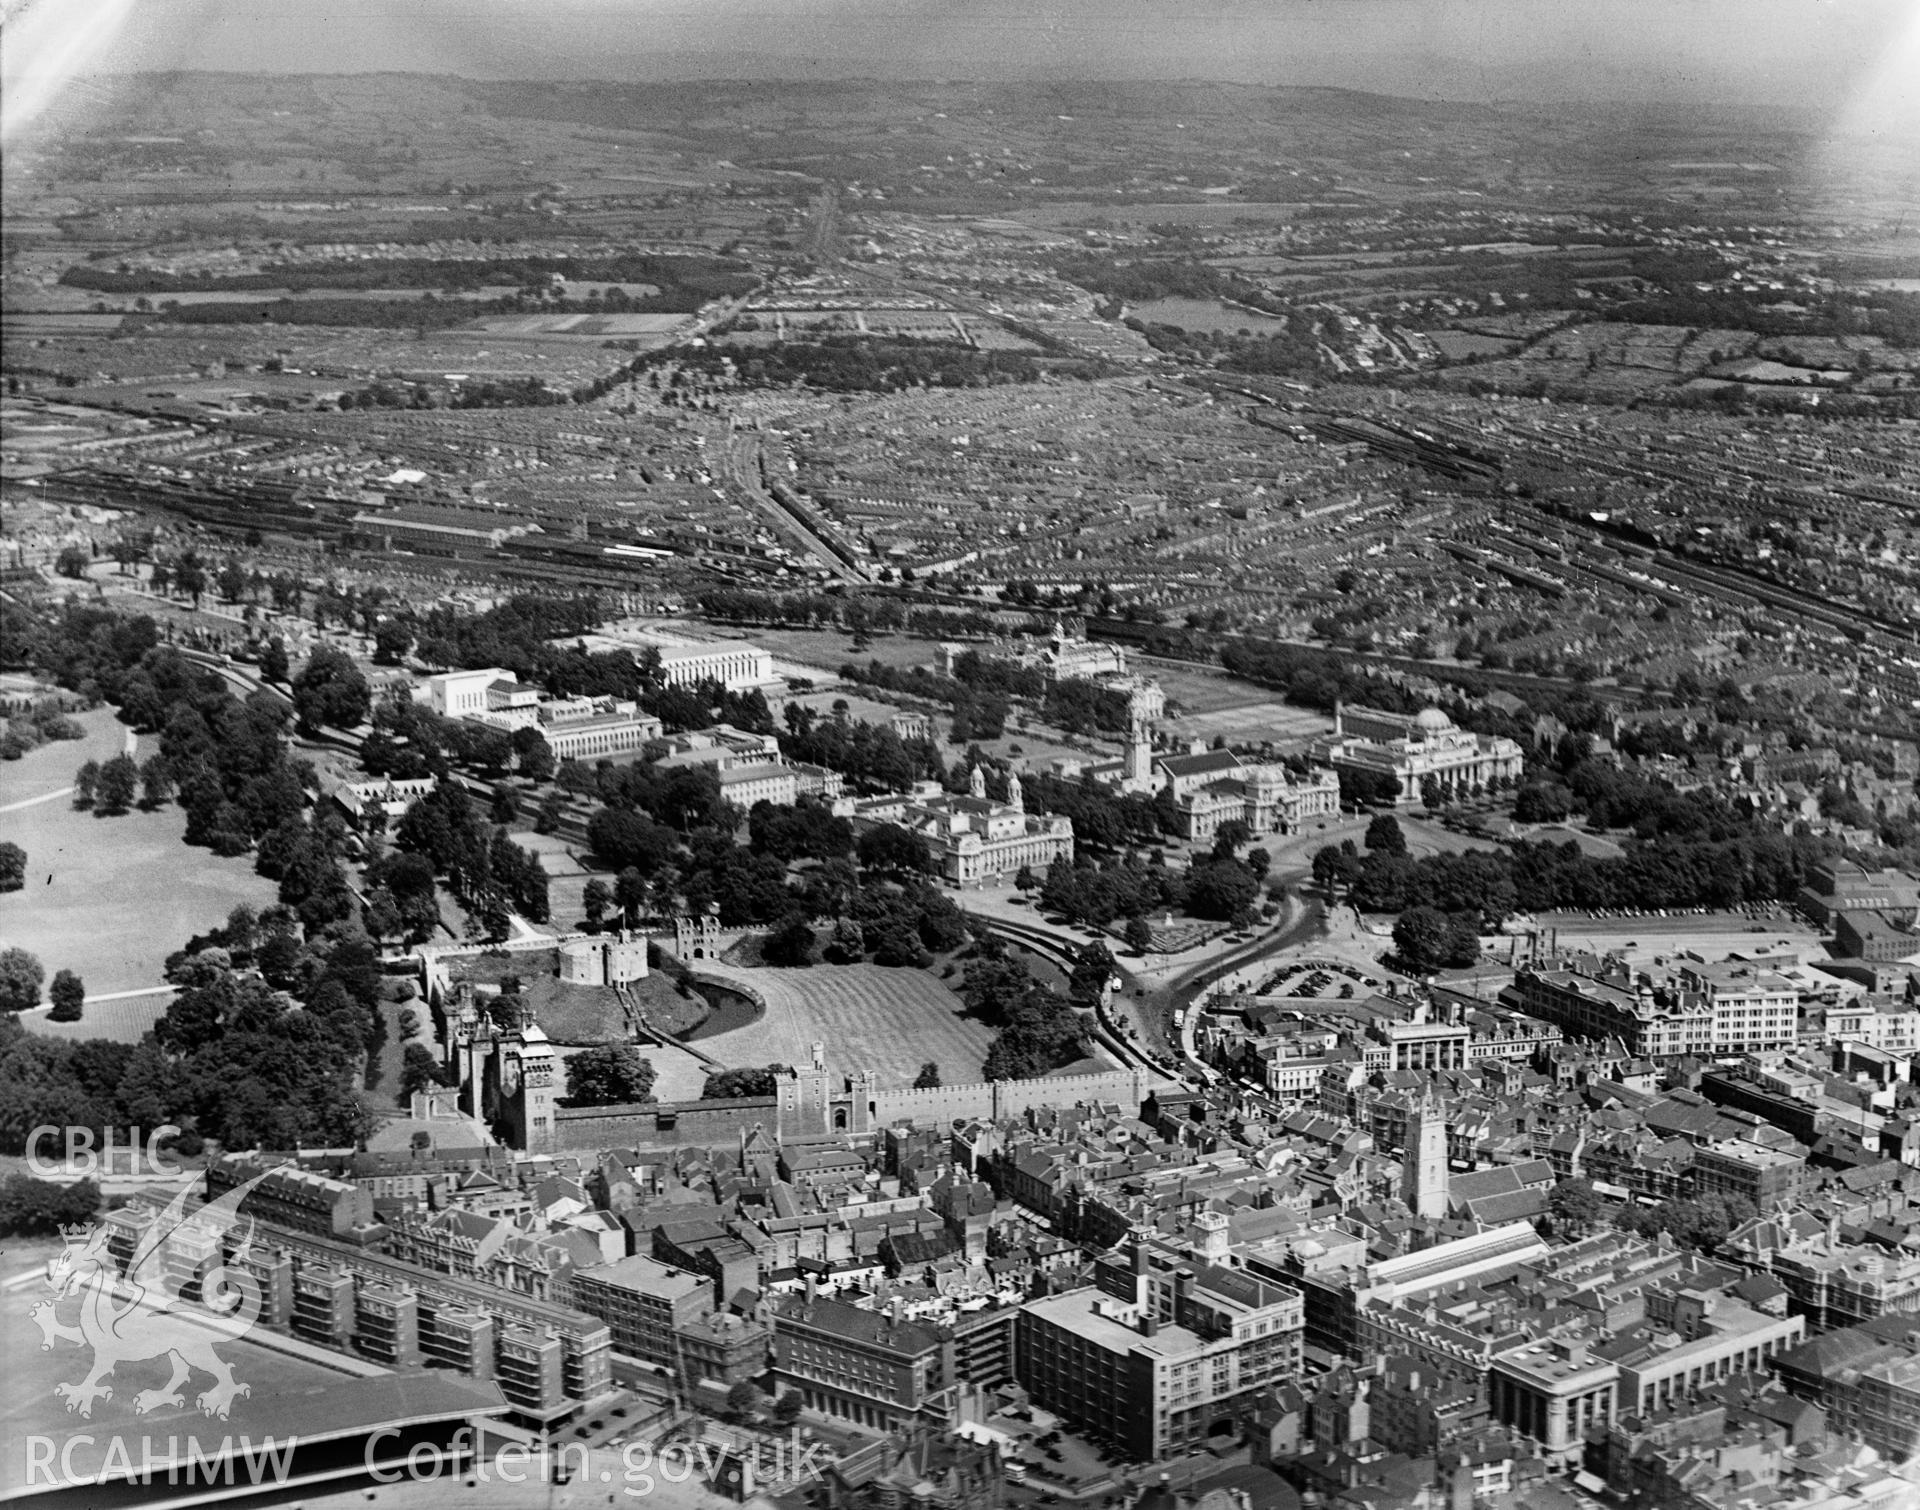 View of Cathays Park, Cardiff showing civic centre and Castle Court Flats in the foreground left, oblique aerial view. 5?x4? black and white glass plate negative.